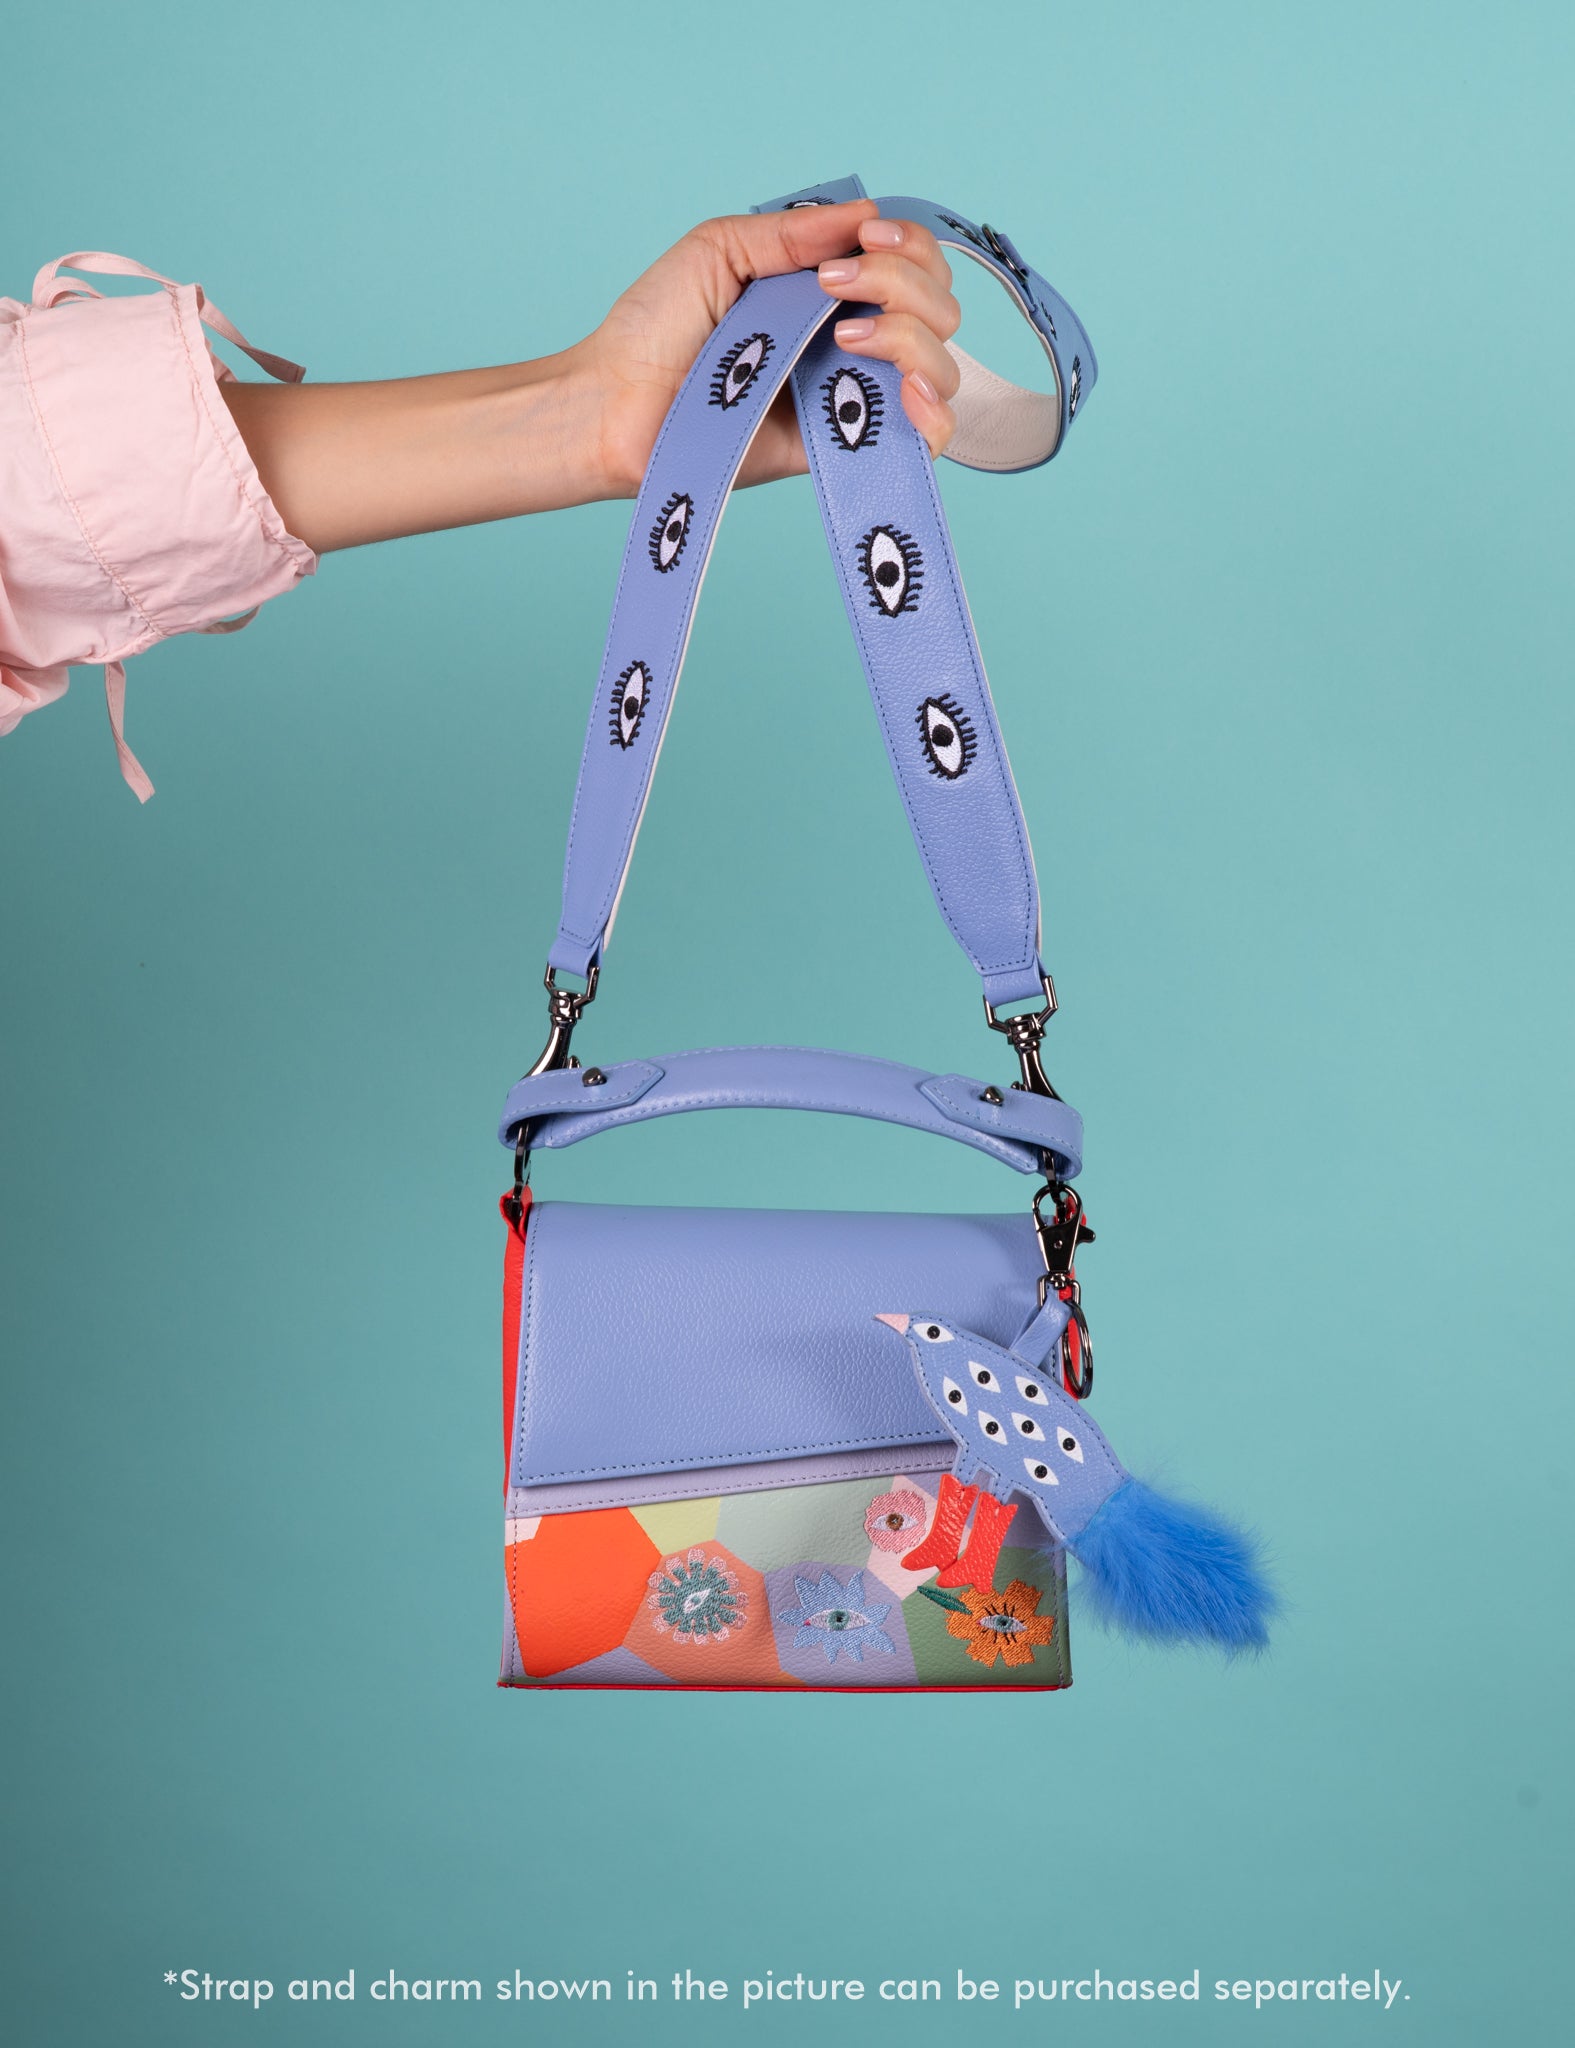 Micro Crossbody Handbag Blue and Red Leather - Camouflaged and flowers Embroidery With blue Strap Sold apart 